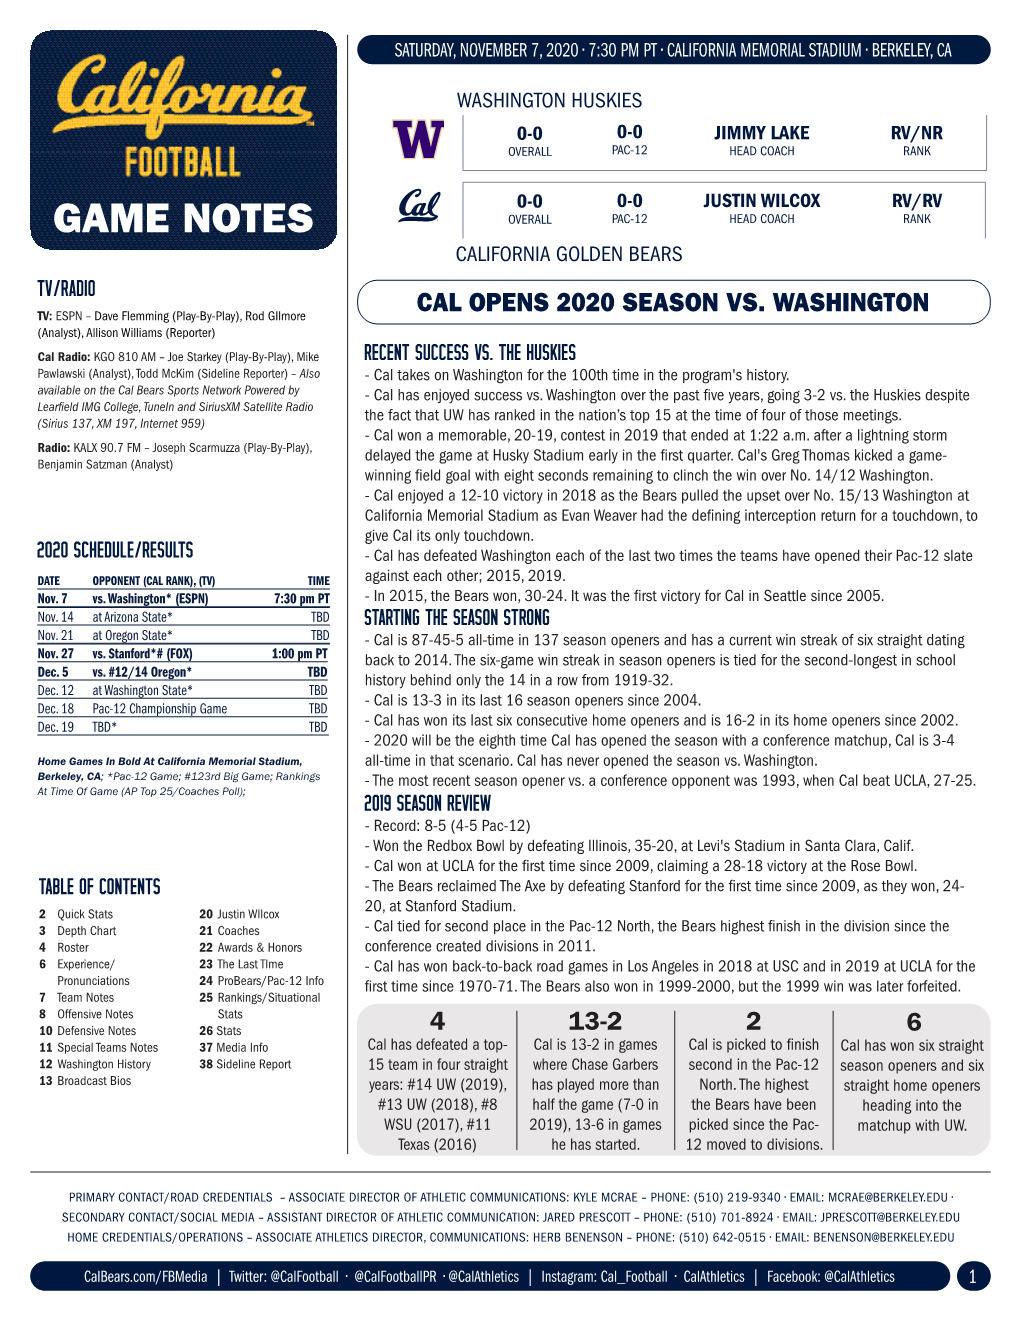 Cal Game Notes